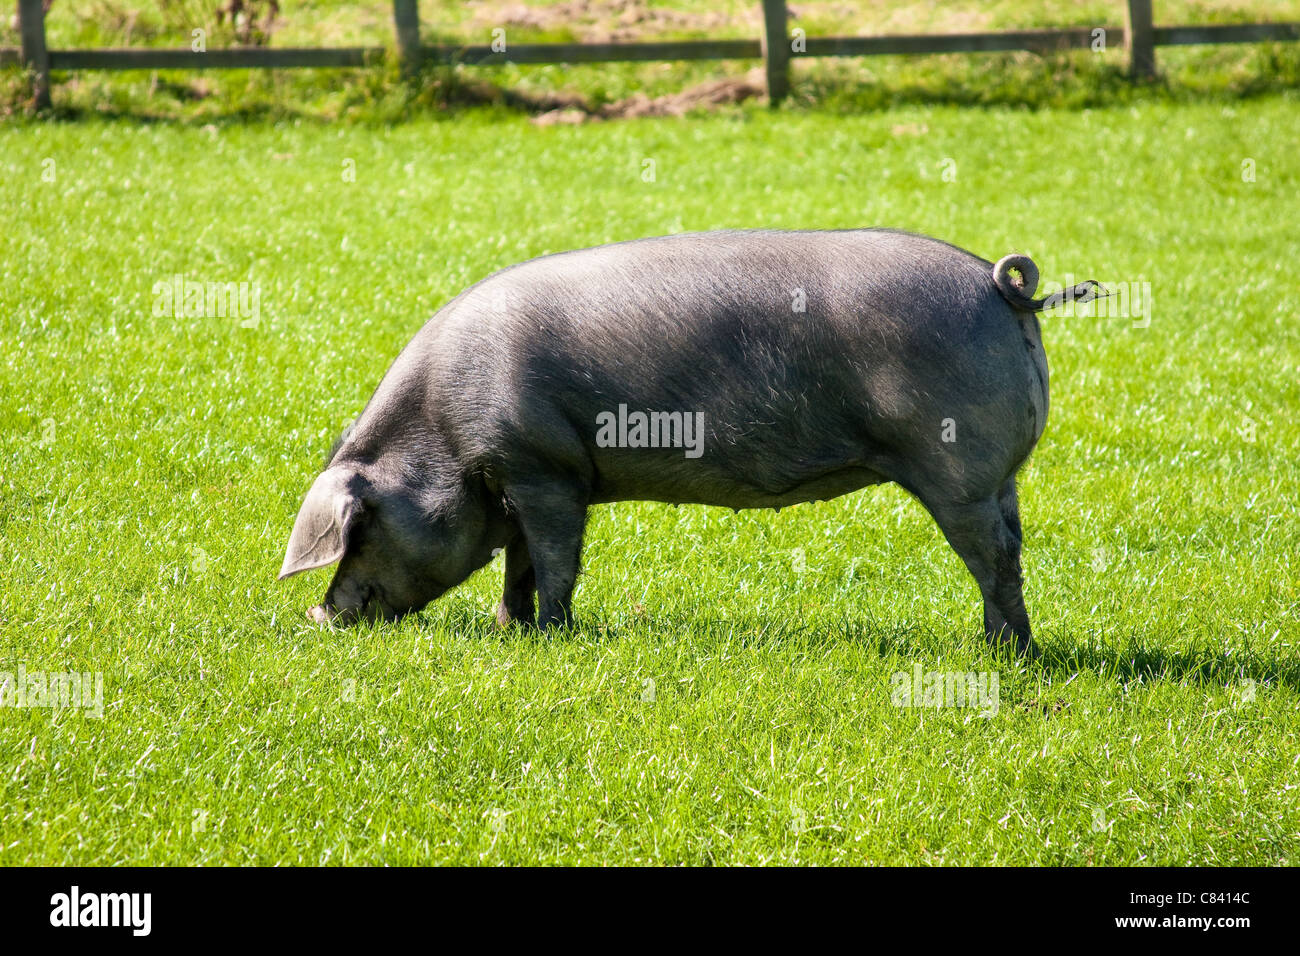 Rare Breed Cornish Black Pig with Curly Tail Stock Photo